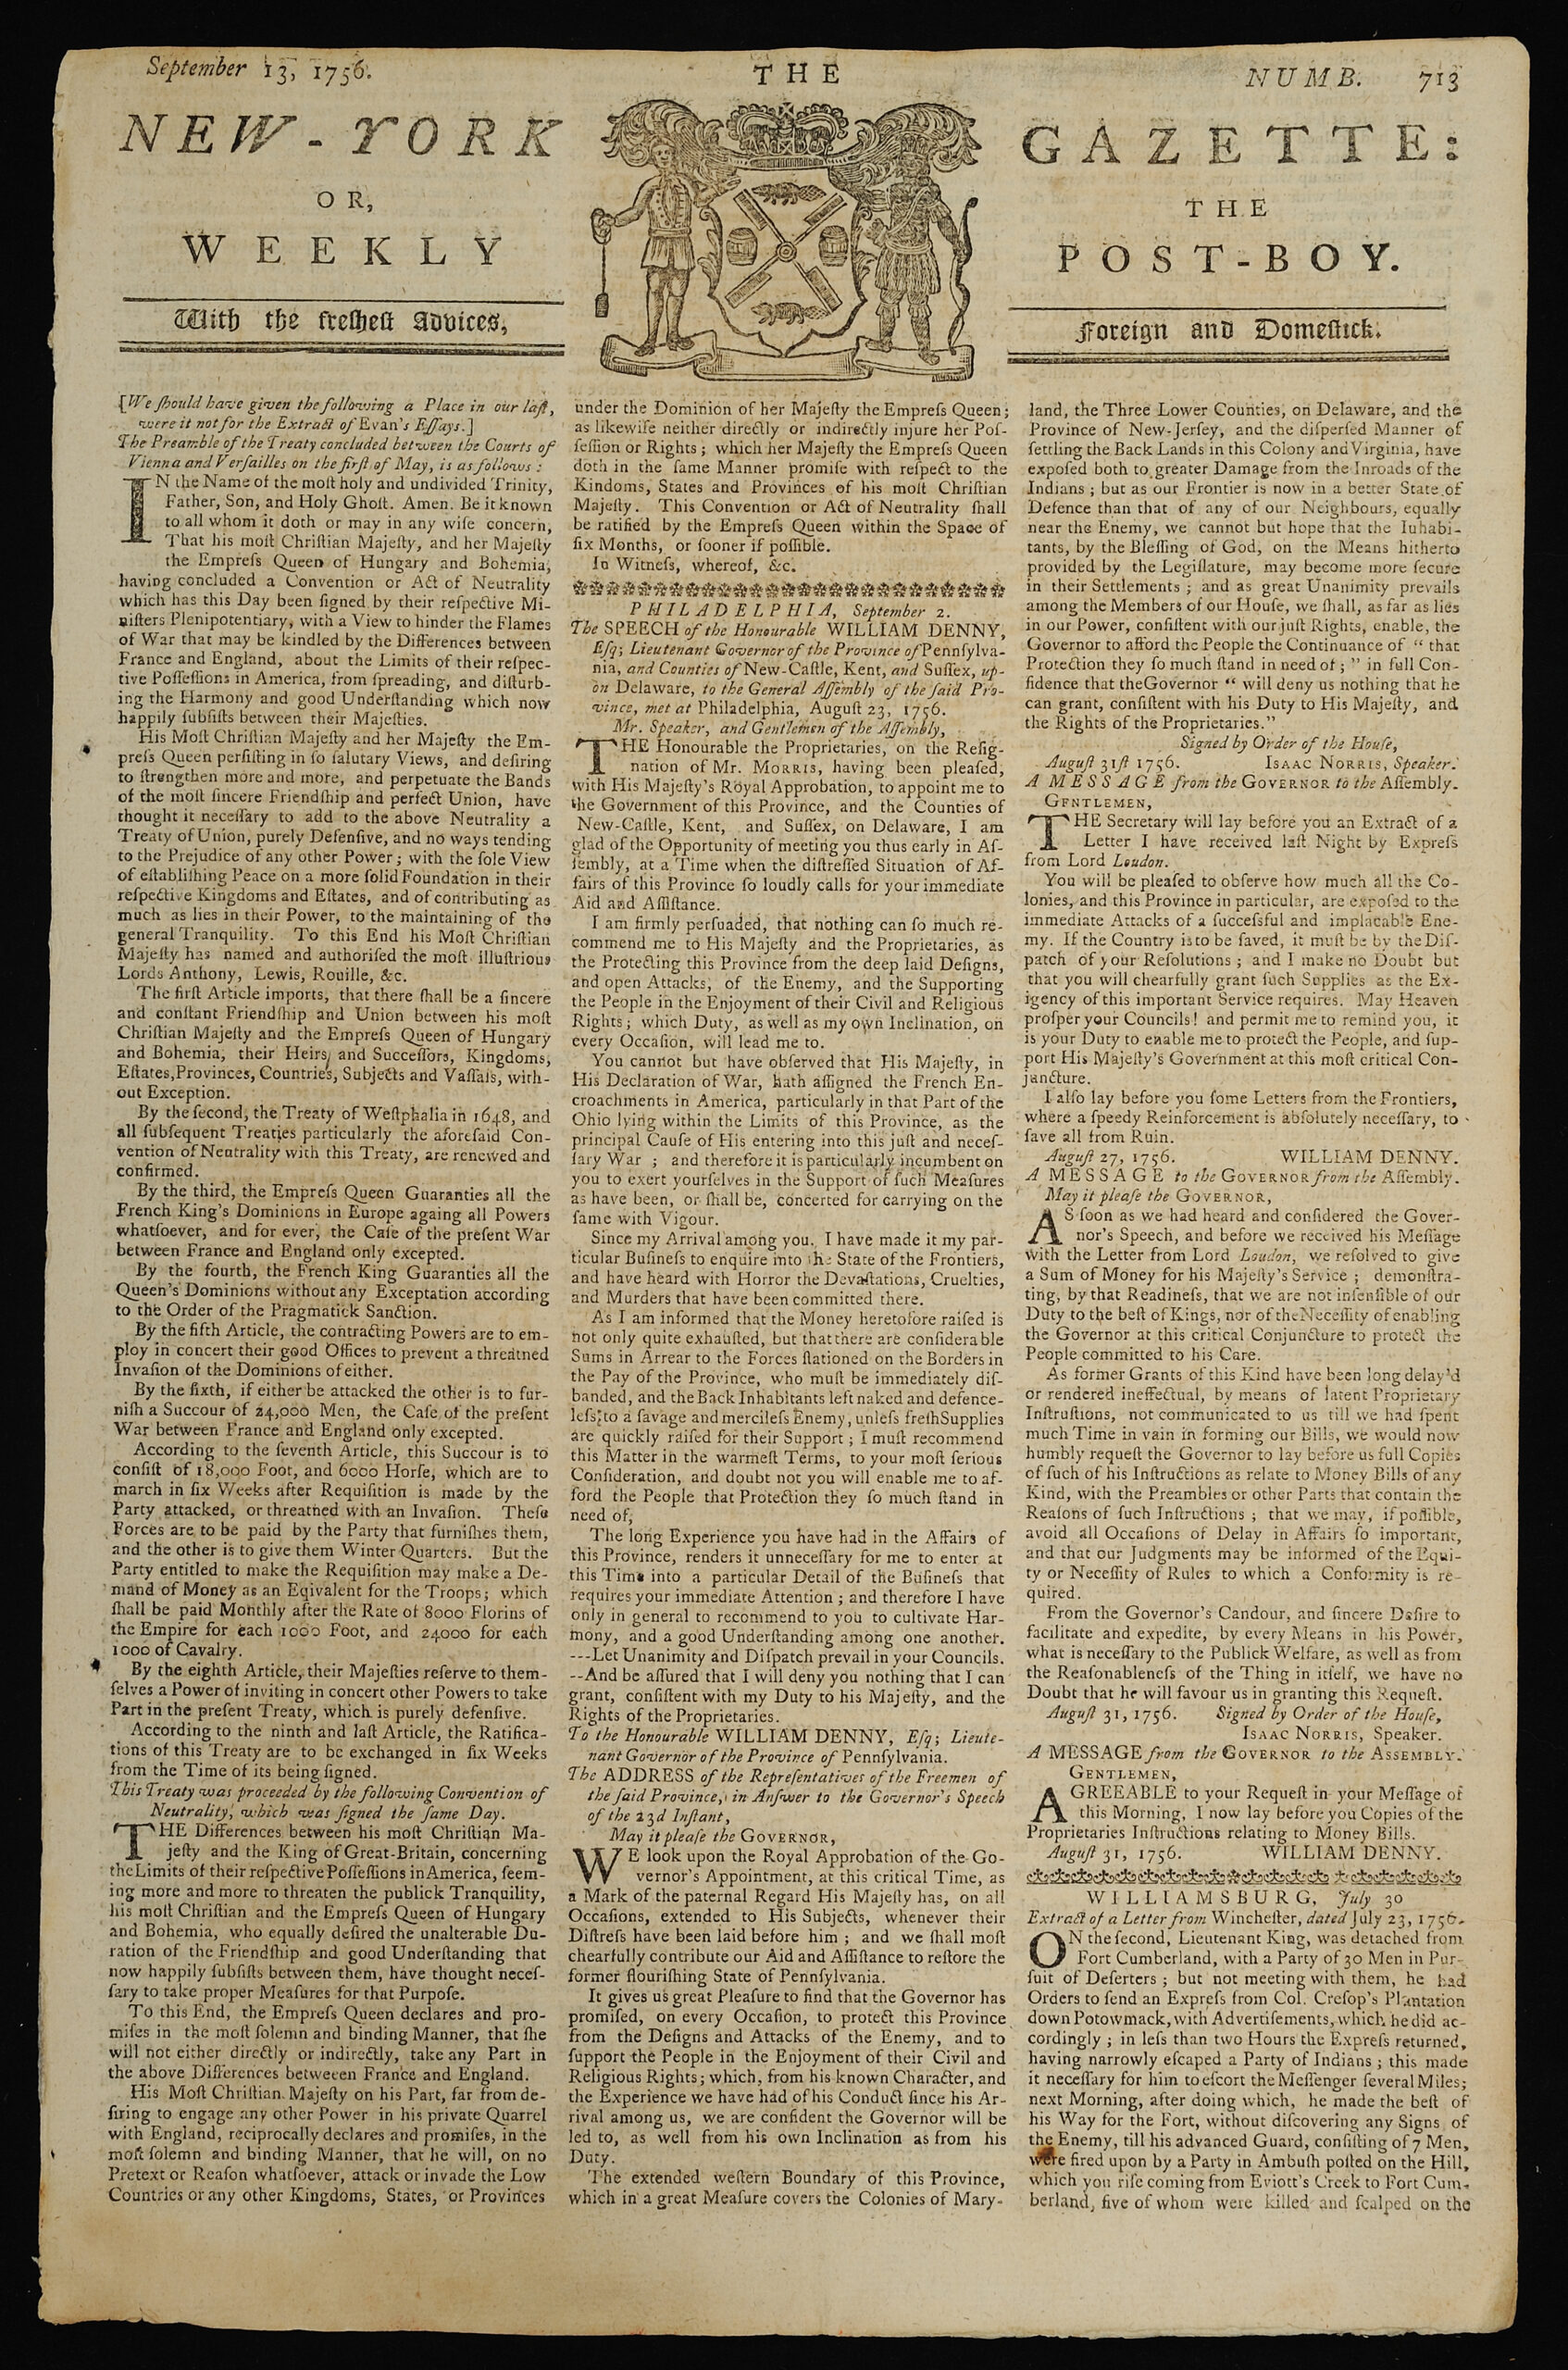 The New York Gazette or, the Weekly Post-Boy New York: Printed by J. Parker and W. Weyman, September 13, 1756